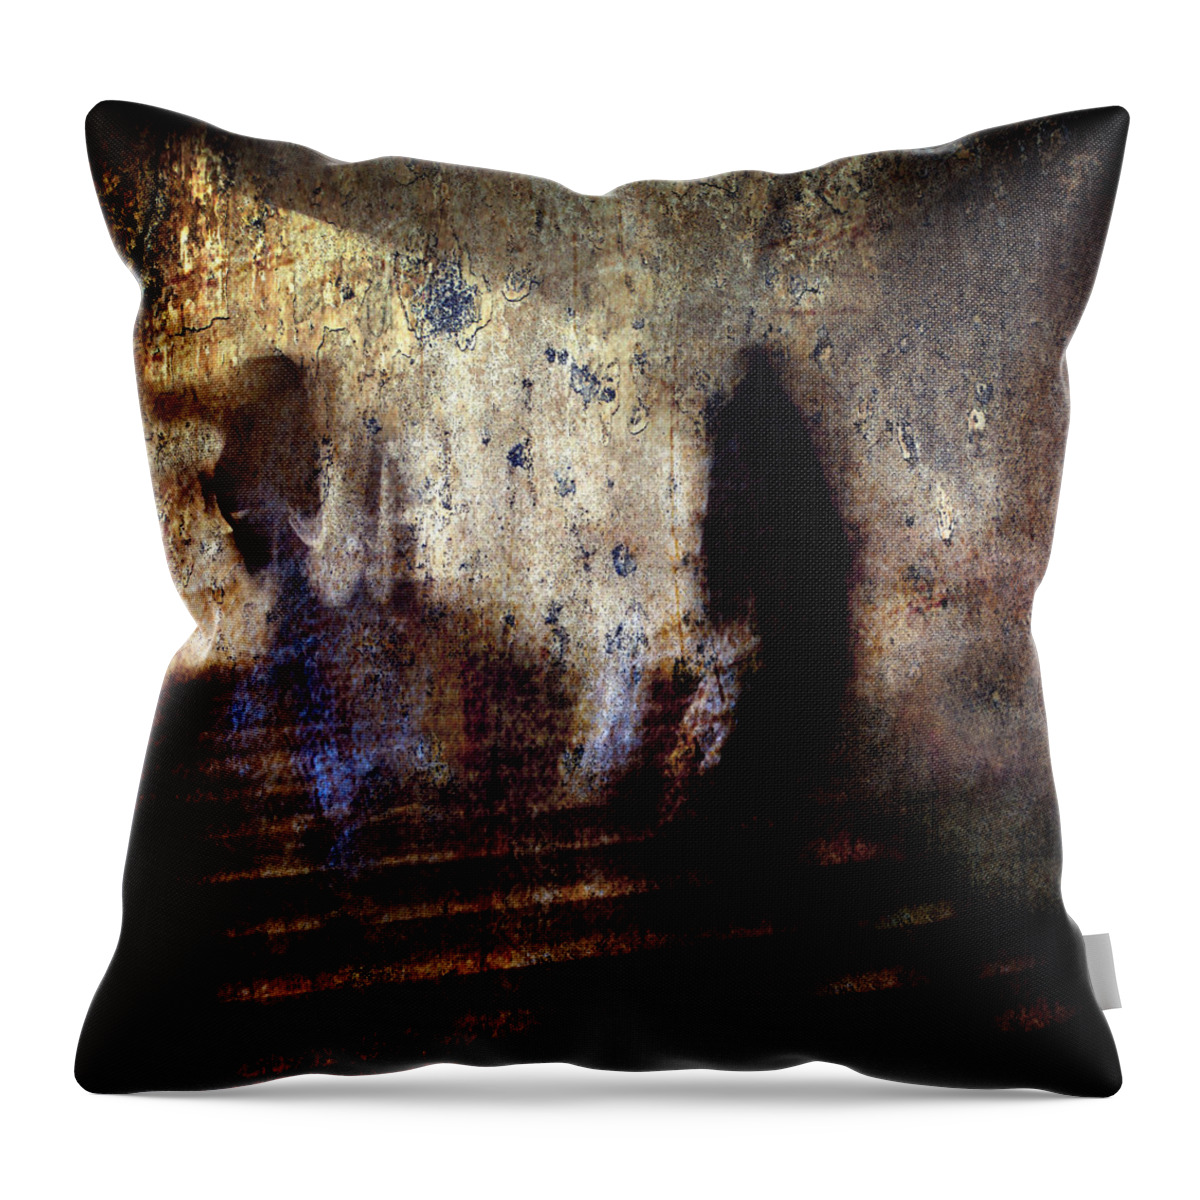 Abstract Throw Pillow featuring the photograph Beyond Two Souls by Stelios Kleanthous